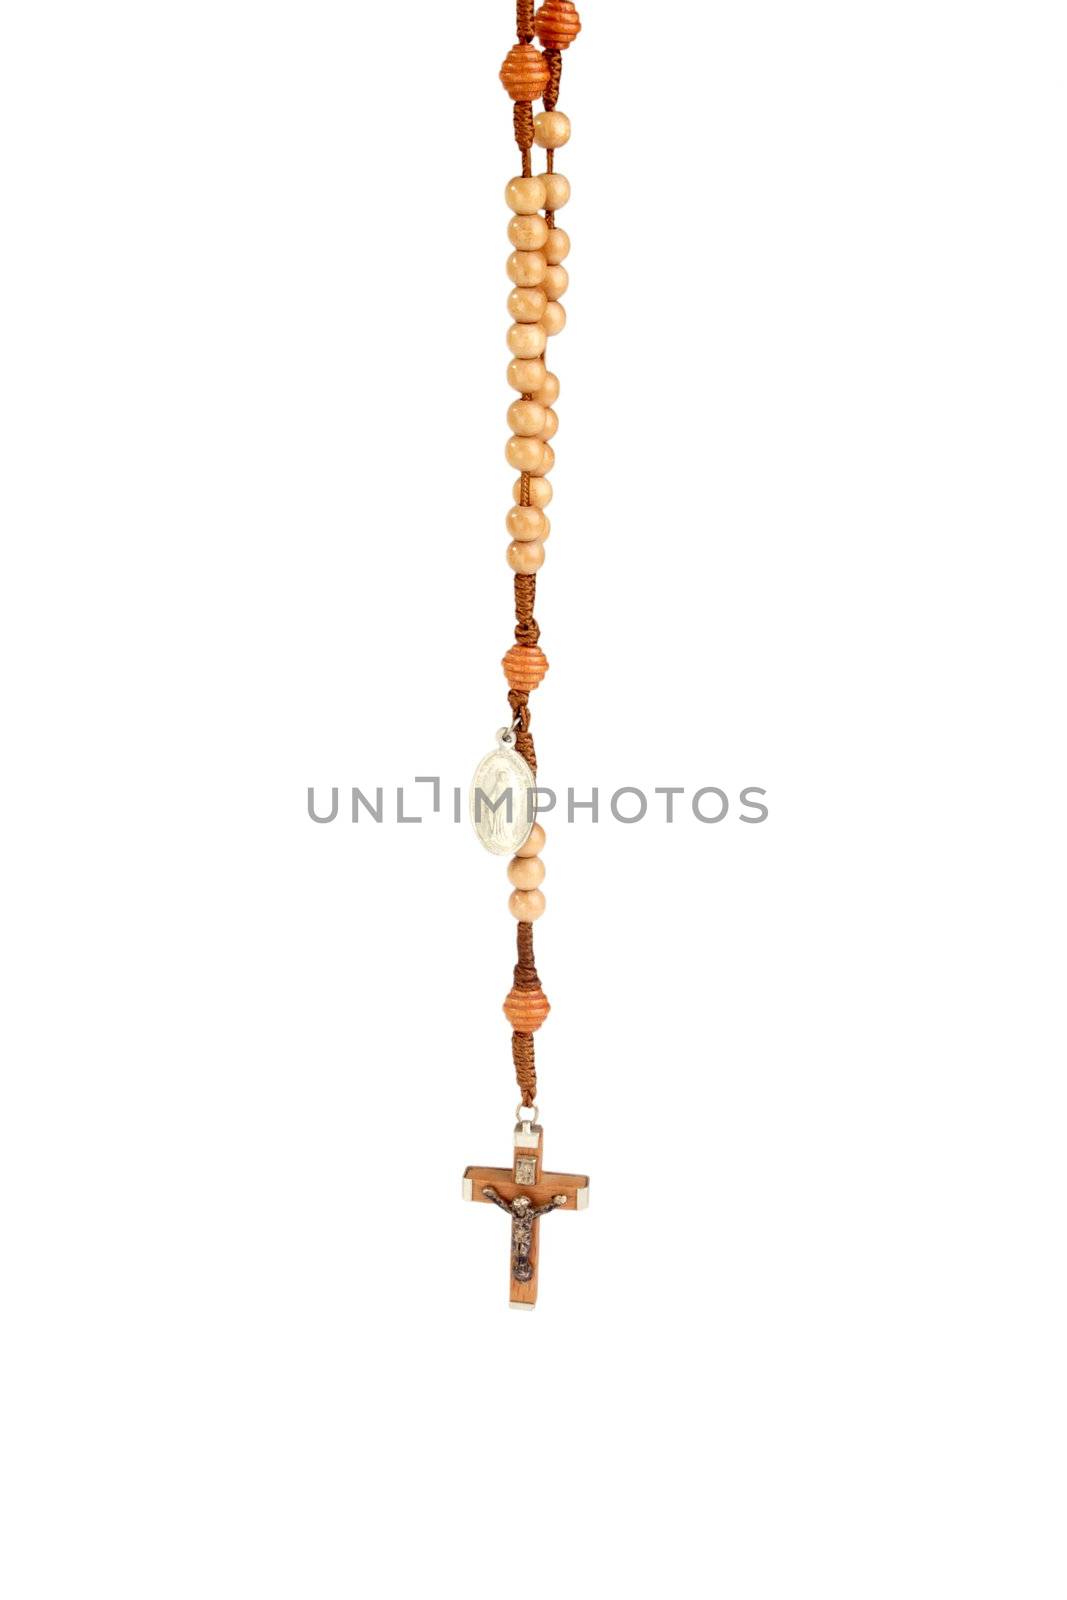 Hanging wooden rosary - isolated on white background